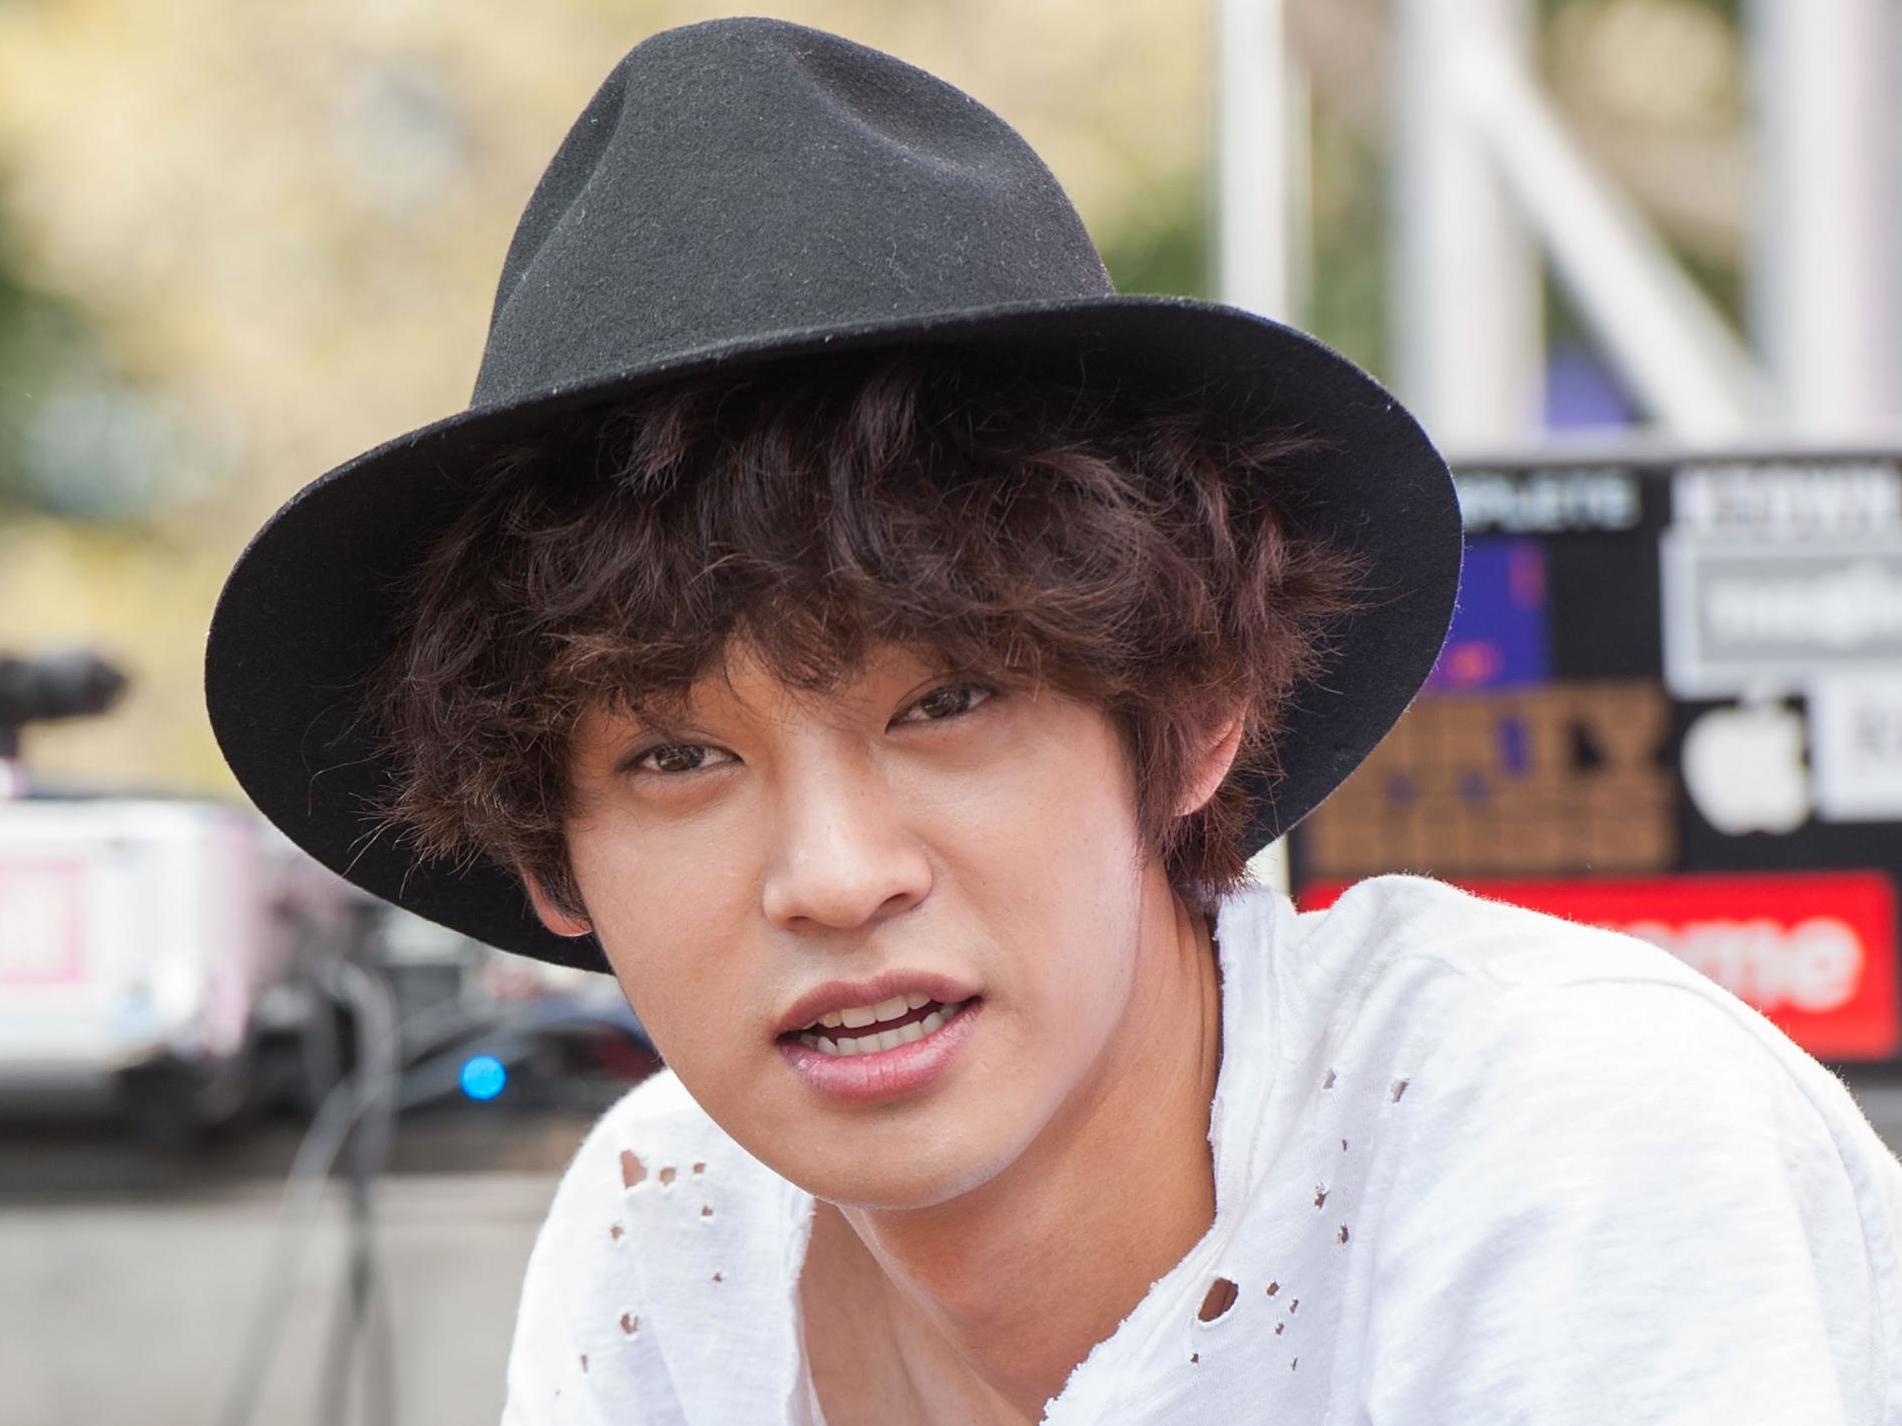 Teen Pussy Lips Fucked - Jung Joon-young scandal: K-pop star quits music industry after filming  secret sex videos | The Independent | The Independent